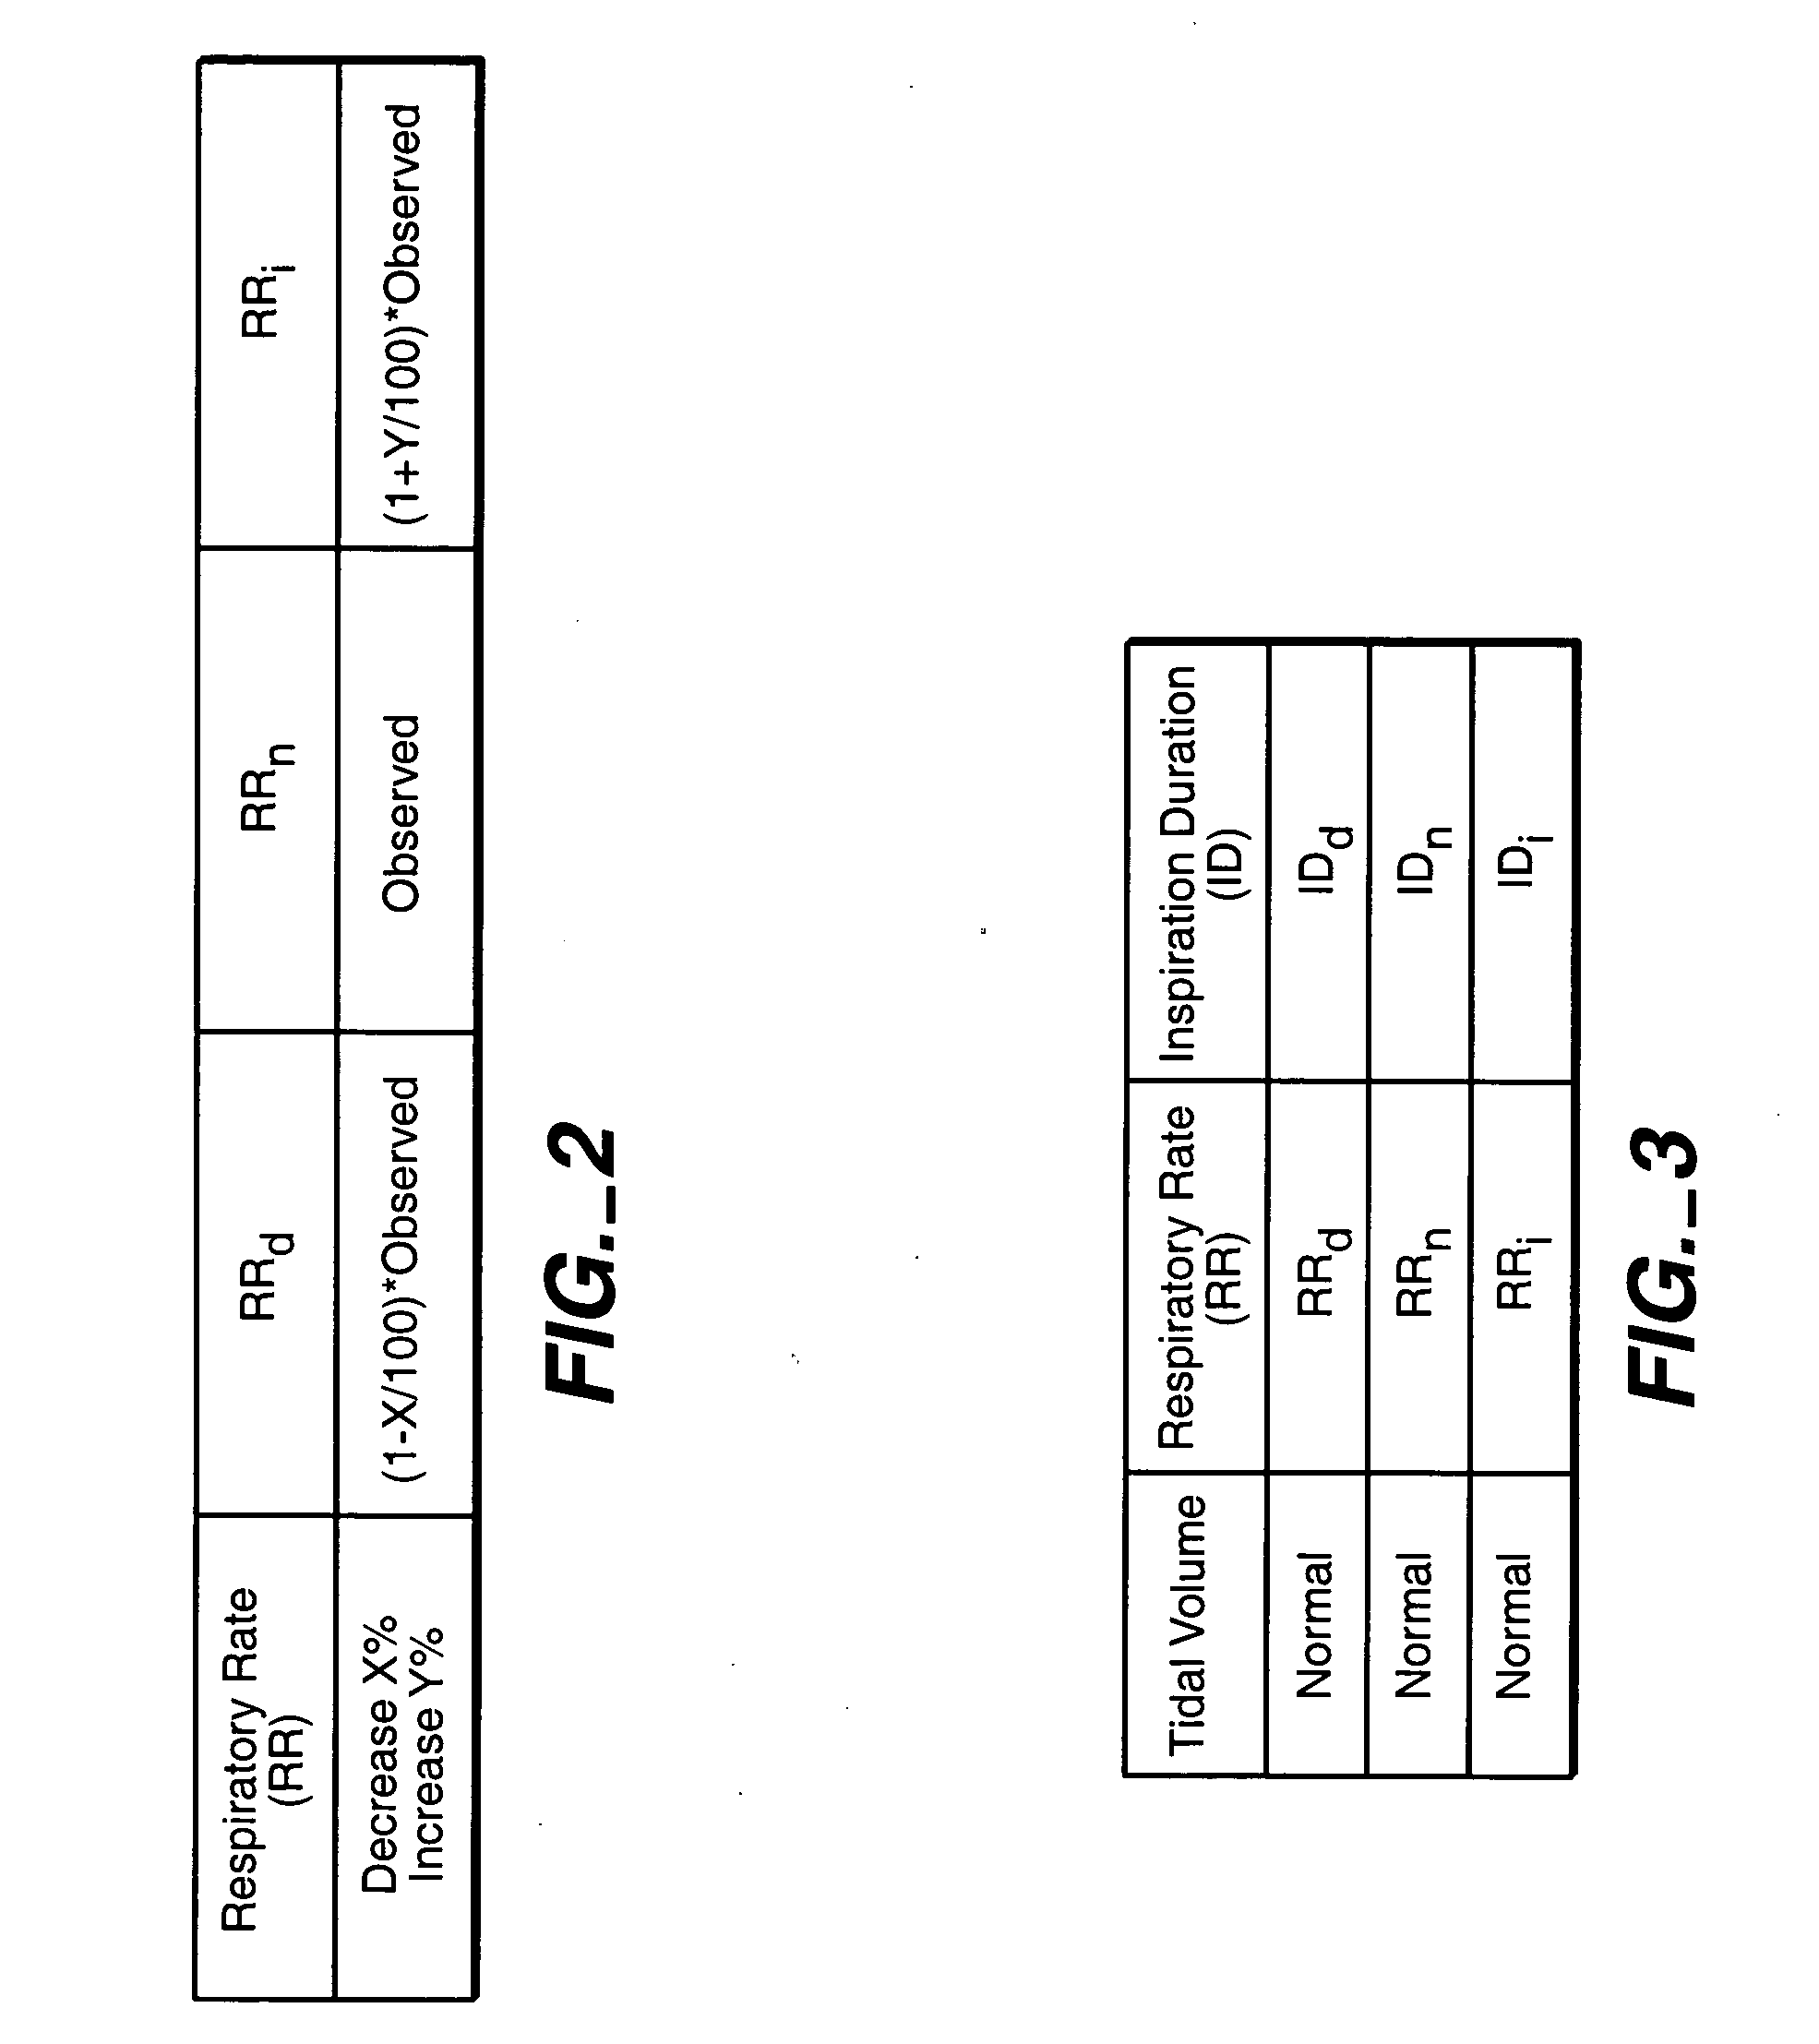 System and method for diaphragm stimulation